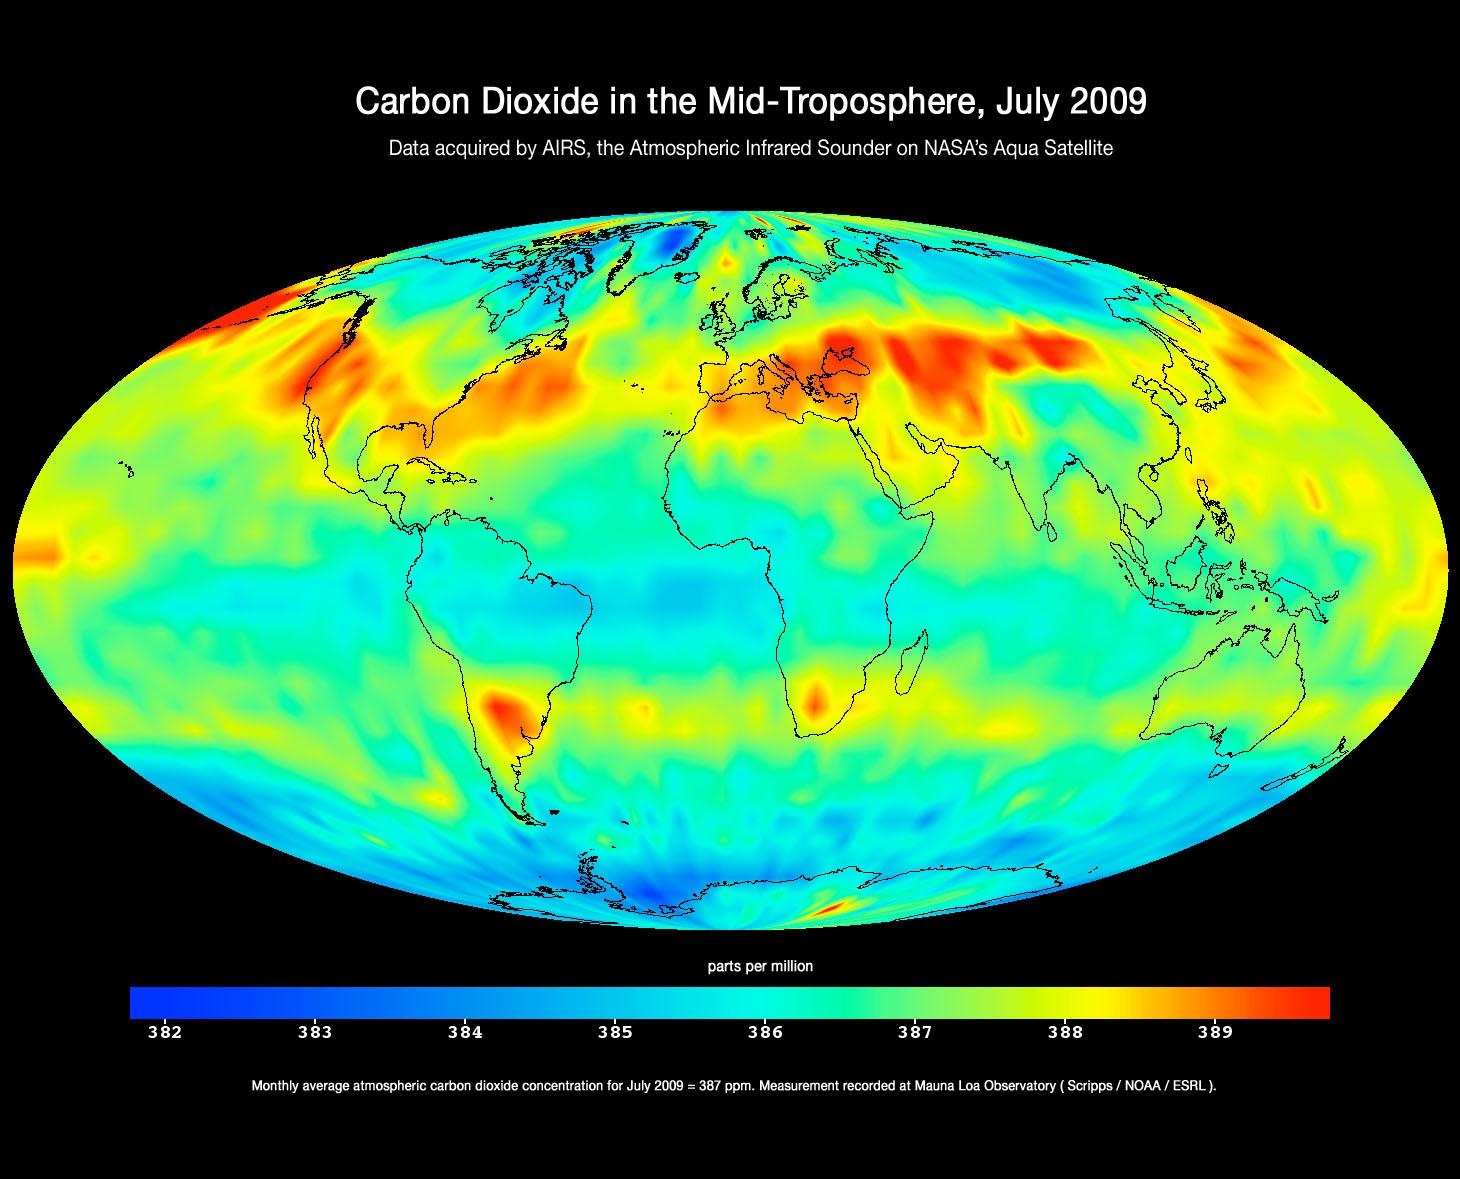 Global Carbon Dioxide Transport from AIRS Data, July 2009